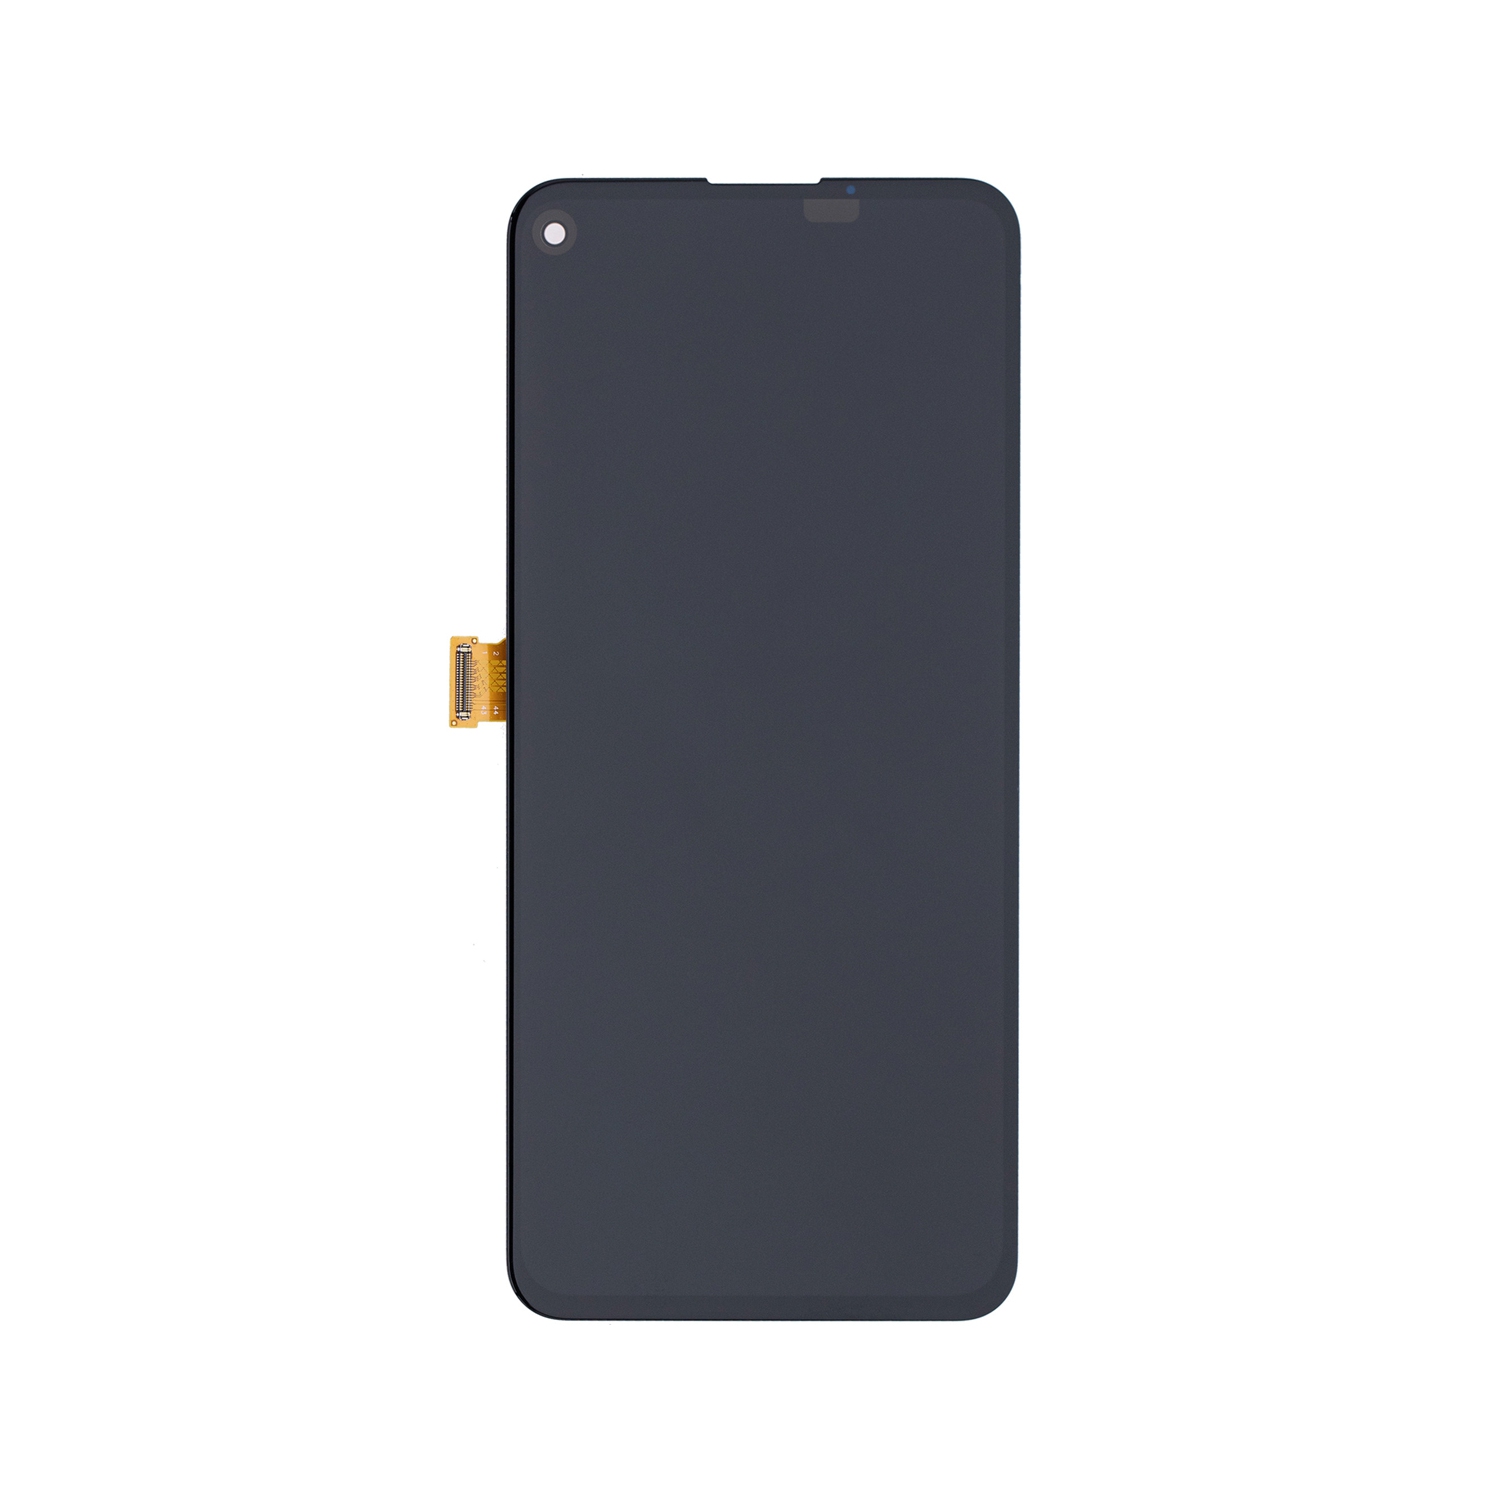 Refurbished (Excellent) - Replacement OLED Display Touch Screen Digitizer Assembly For Google Pixel 5a 5G - All Colors